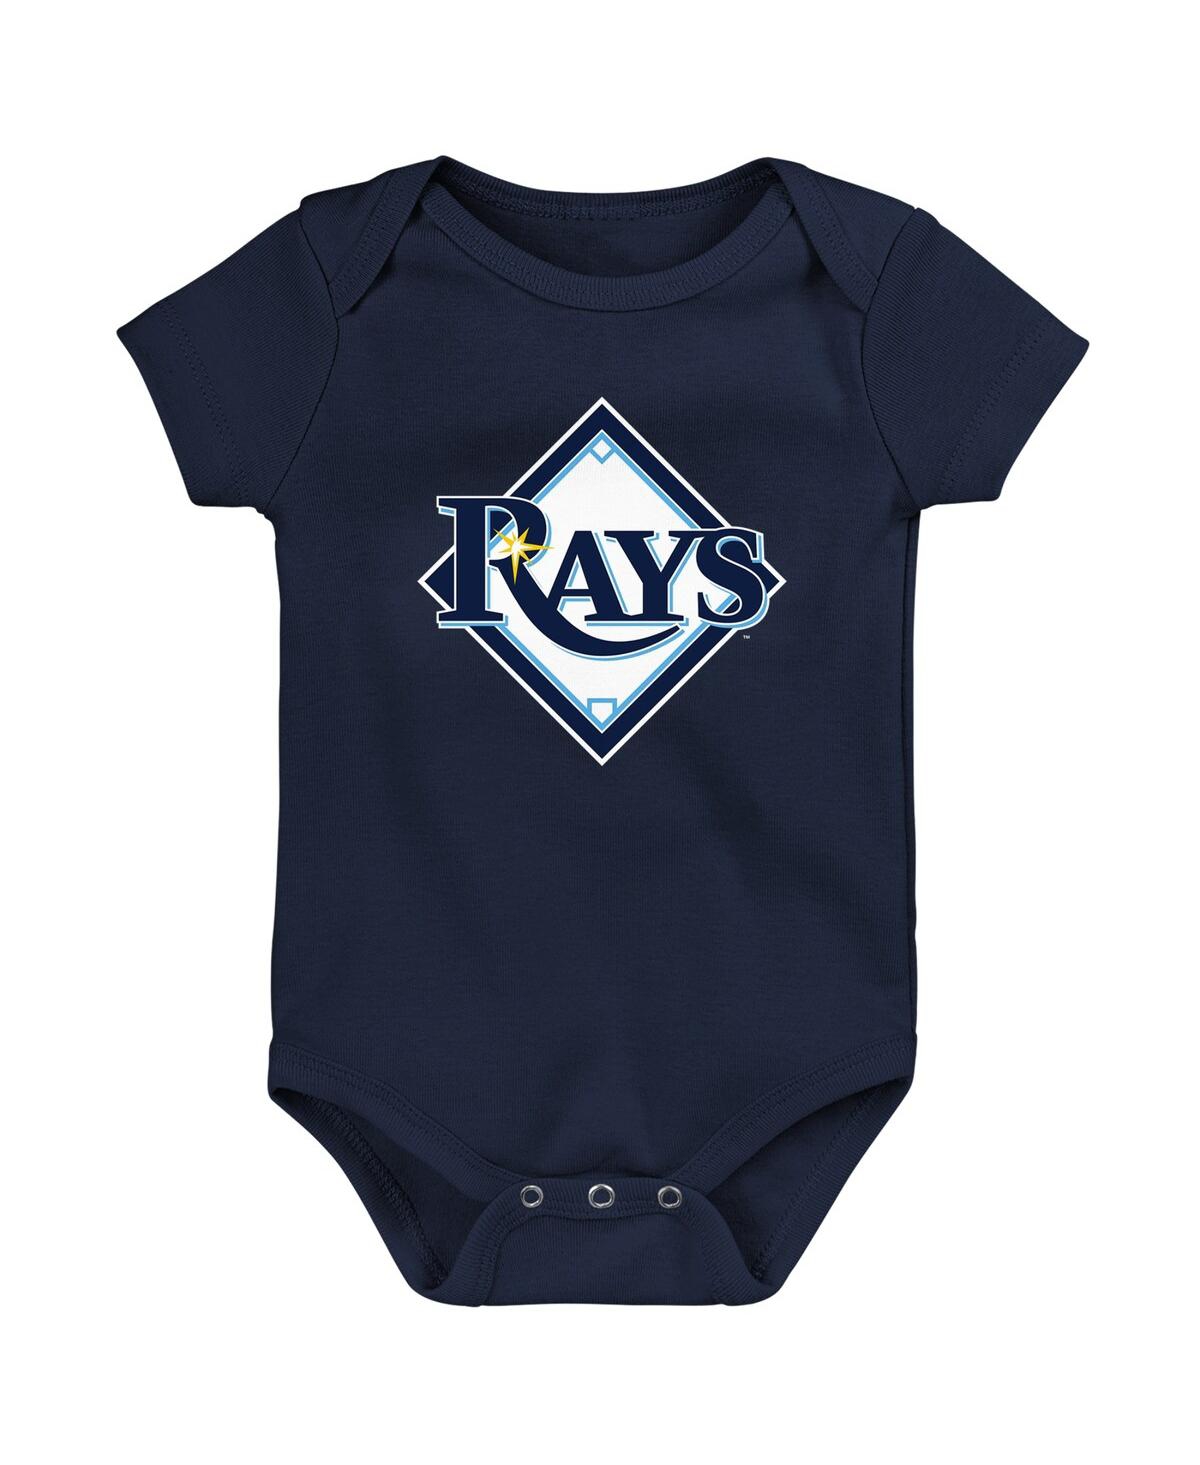 Outerstuff Babies' Newborn And Infant Boys And Girls Navy Tampa Bay Rays Primary Team Logo Bodysuit